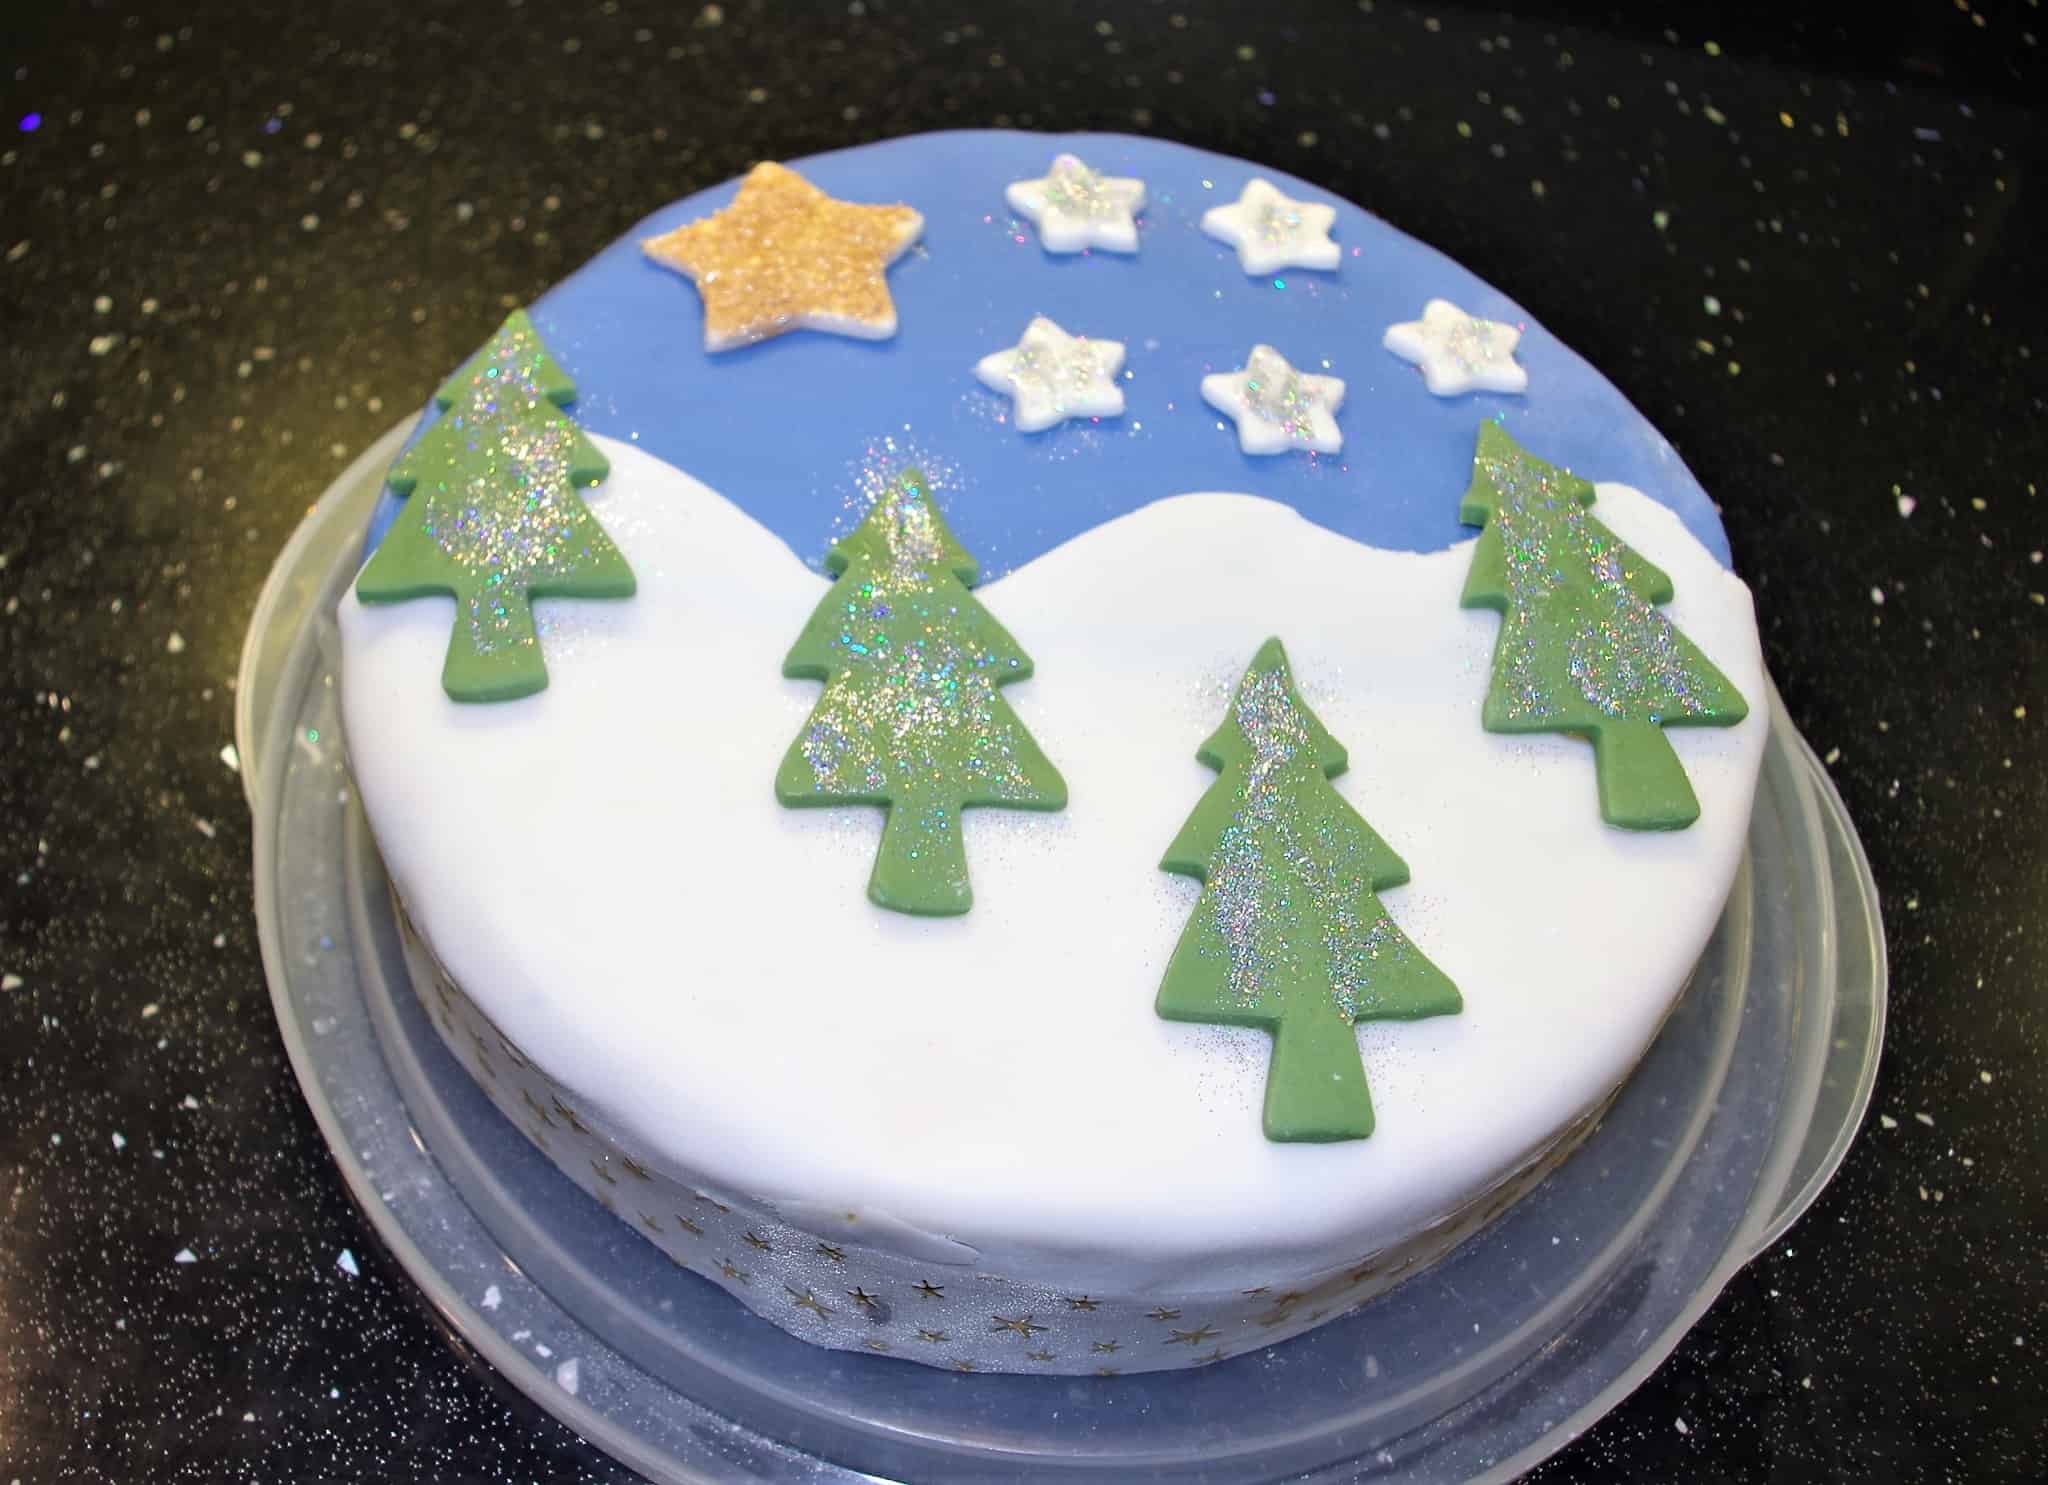 Fondant covered cake with winter forest scene